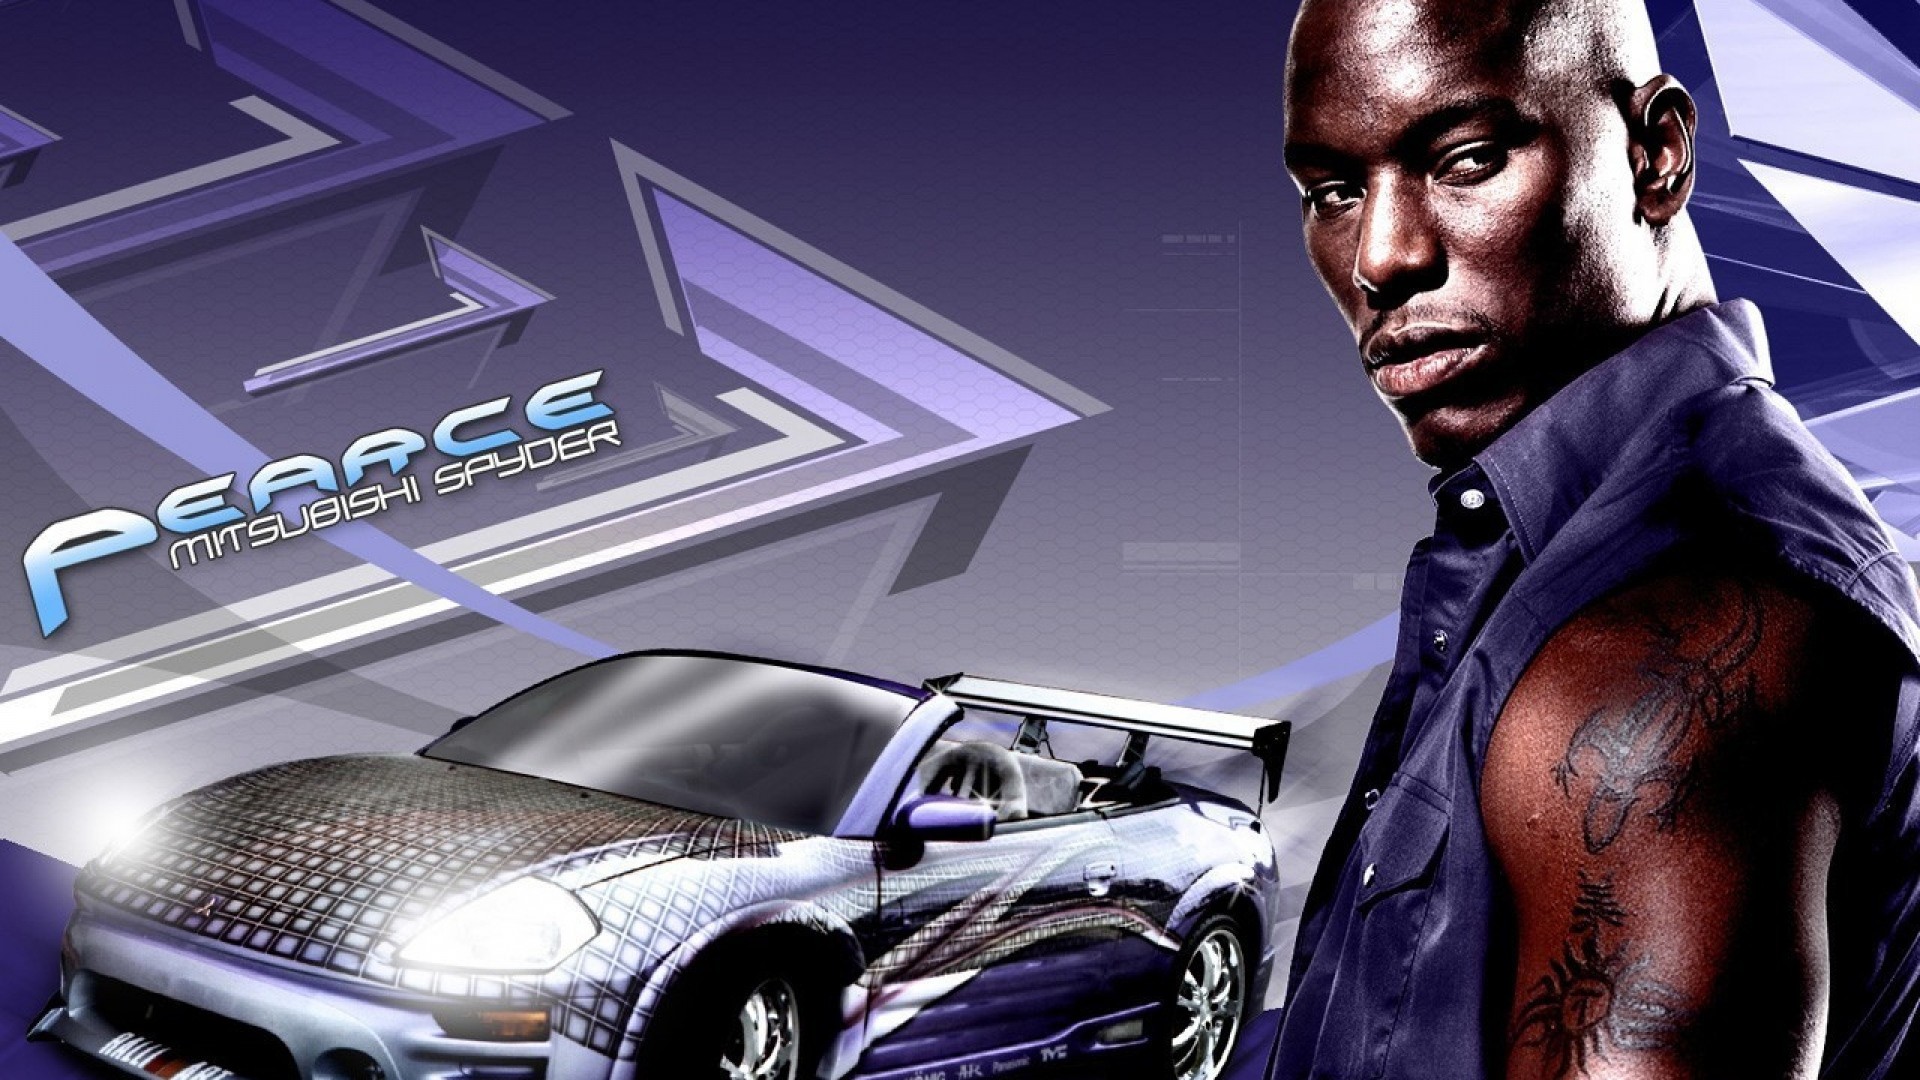 1920x1080 Fast-And-Furious-Car-Images